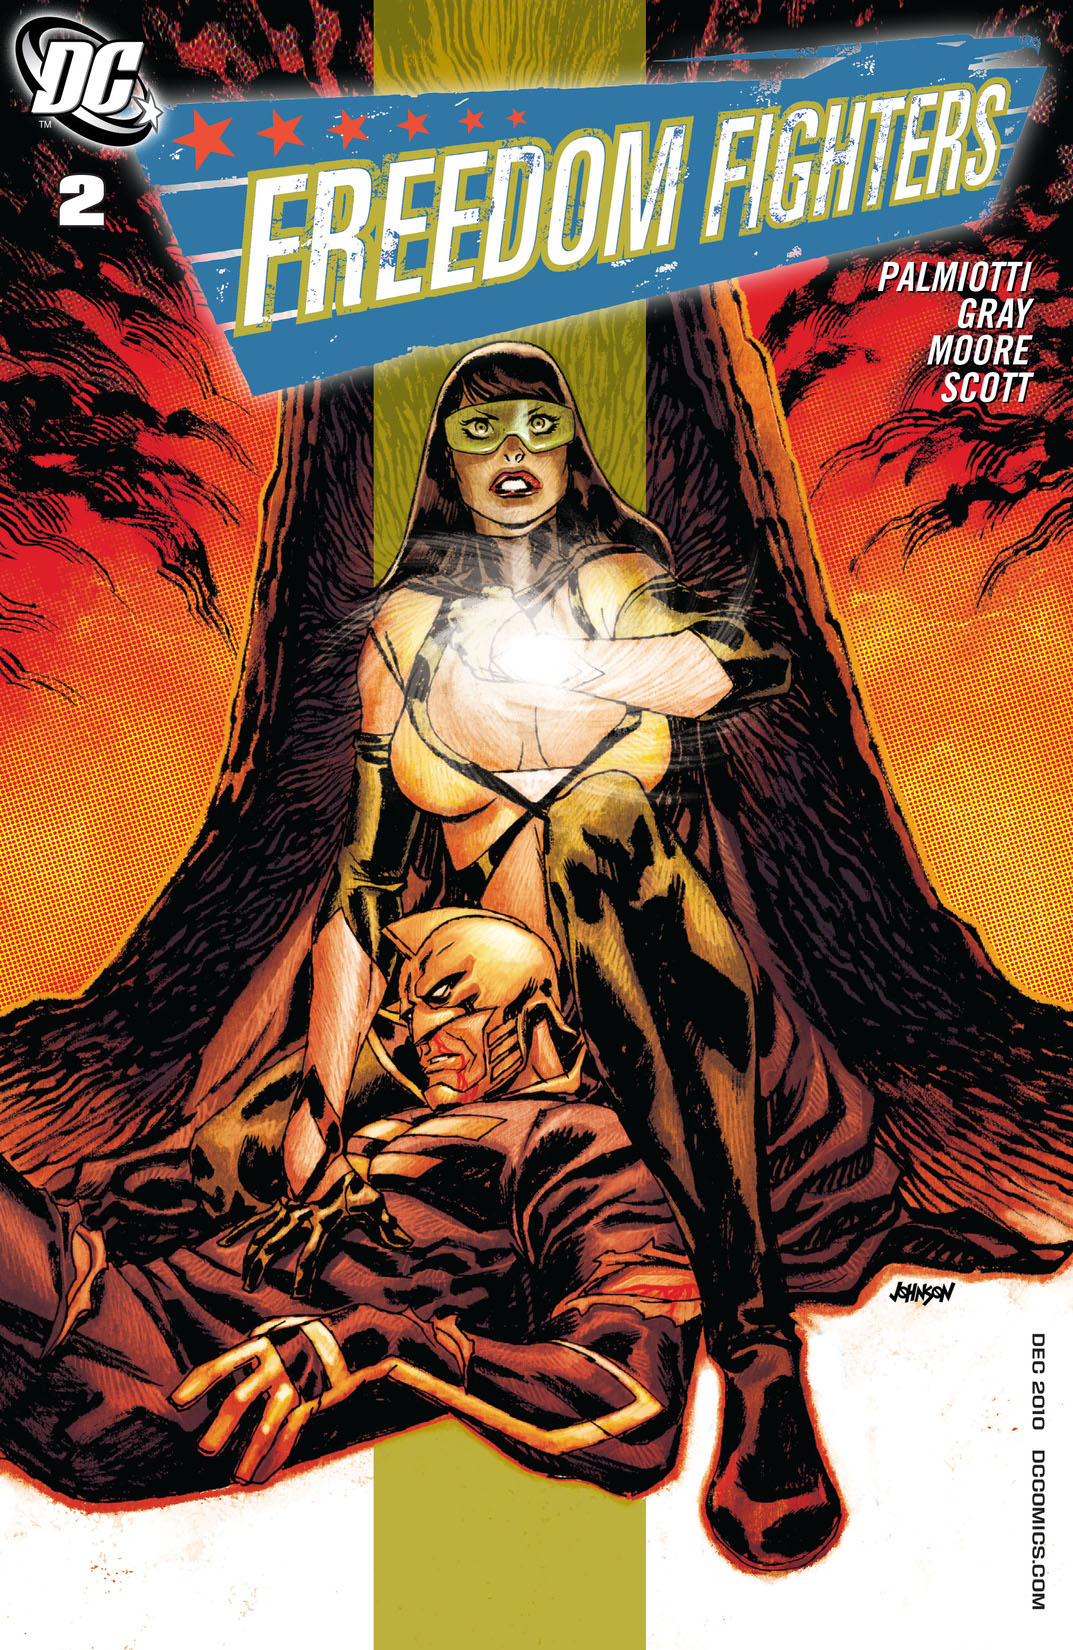 Freedom Fighters (2010-) #2 preview images